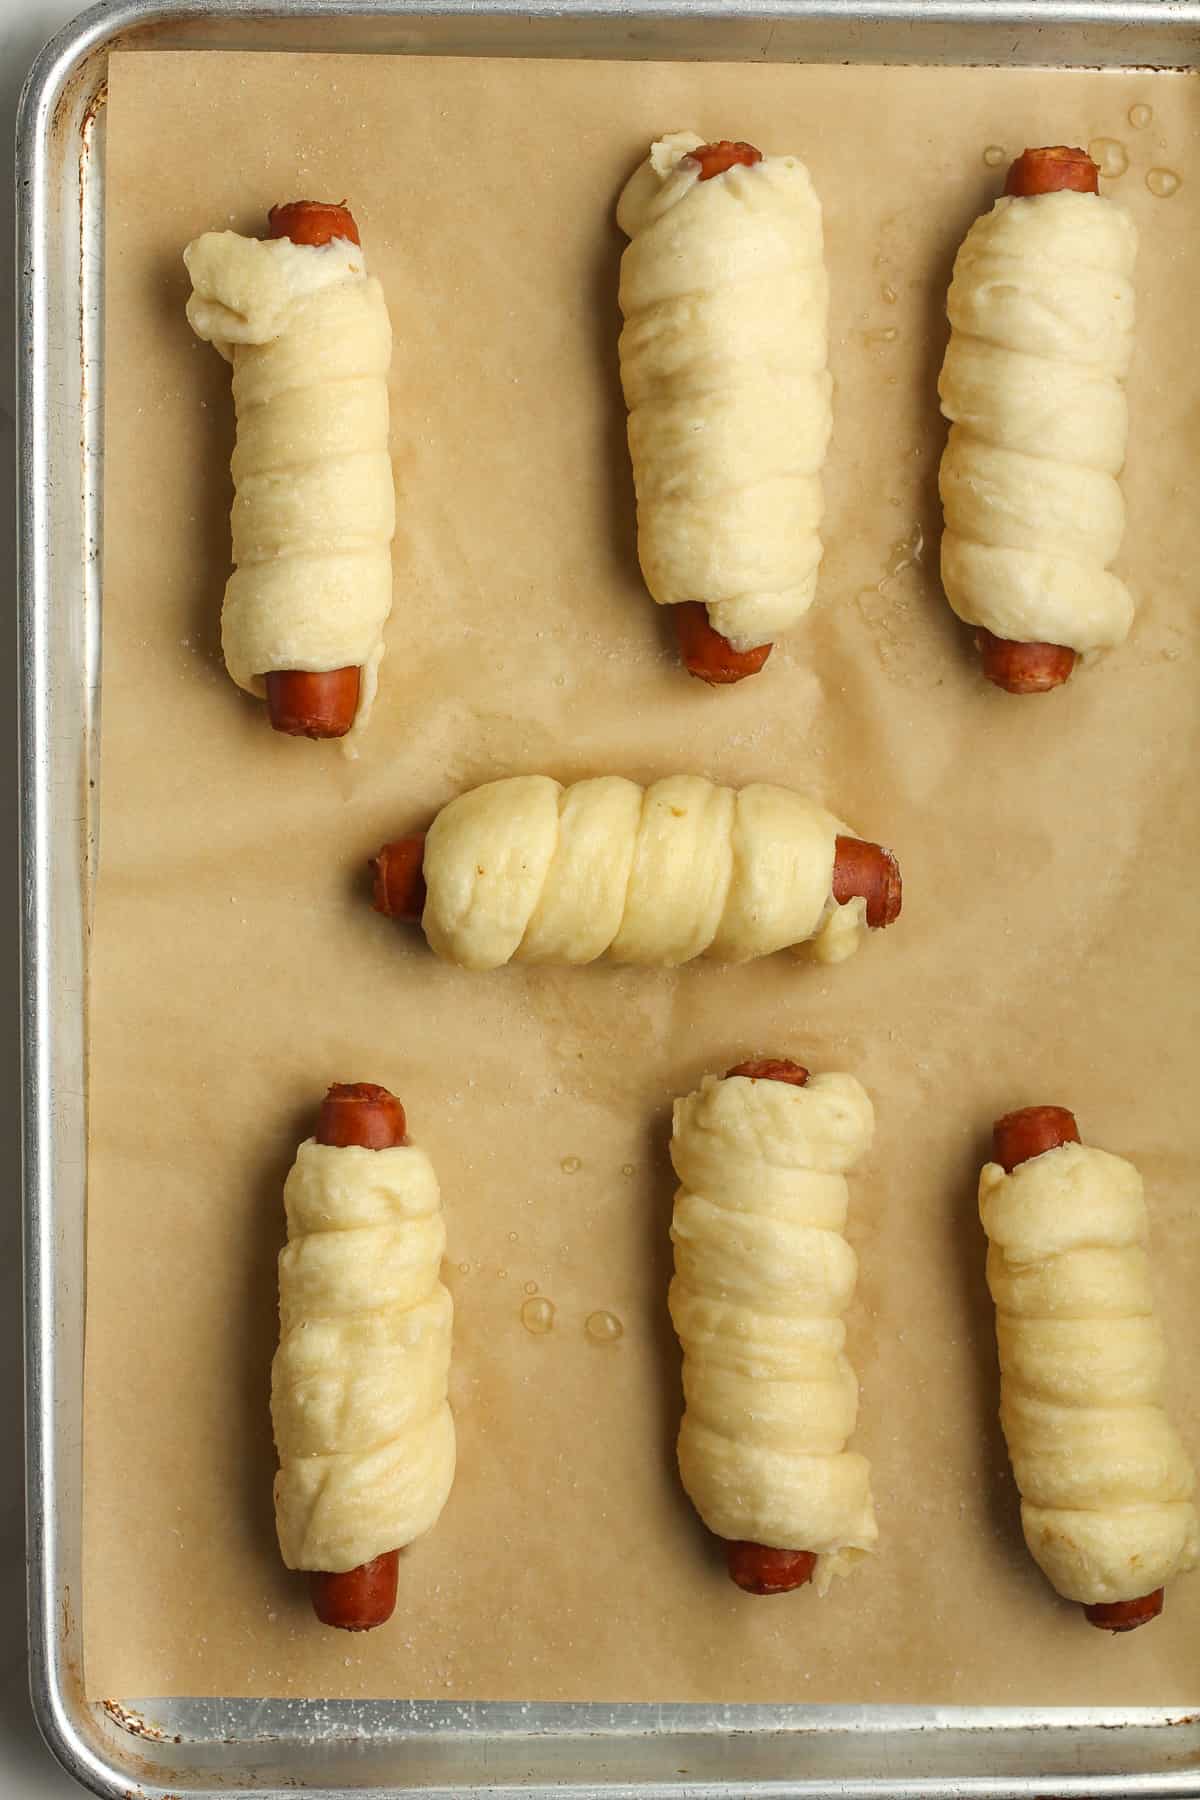 The pretzel dogs after boiling in baking soda, ready to bake.